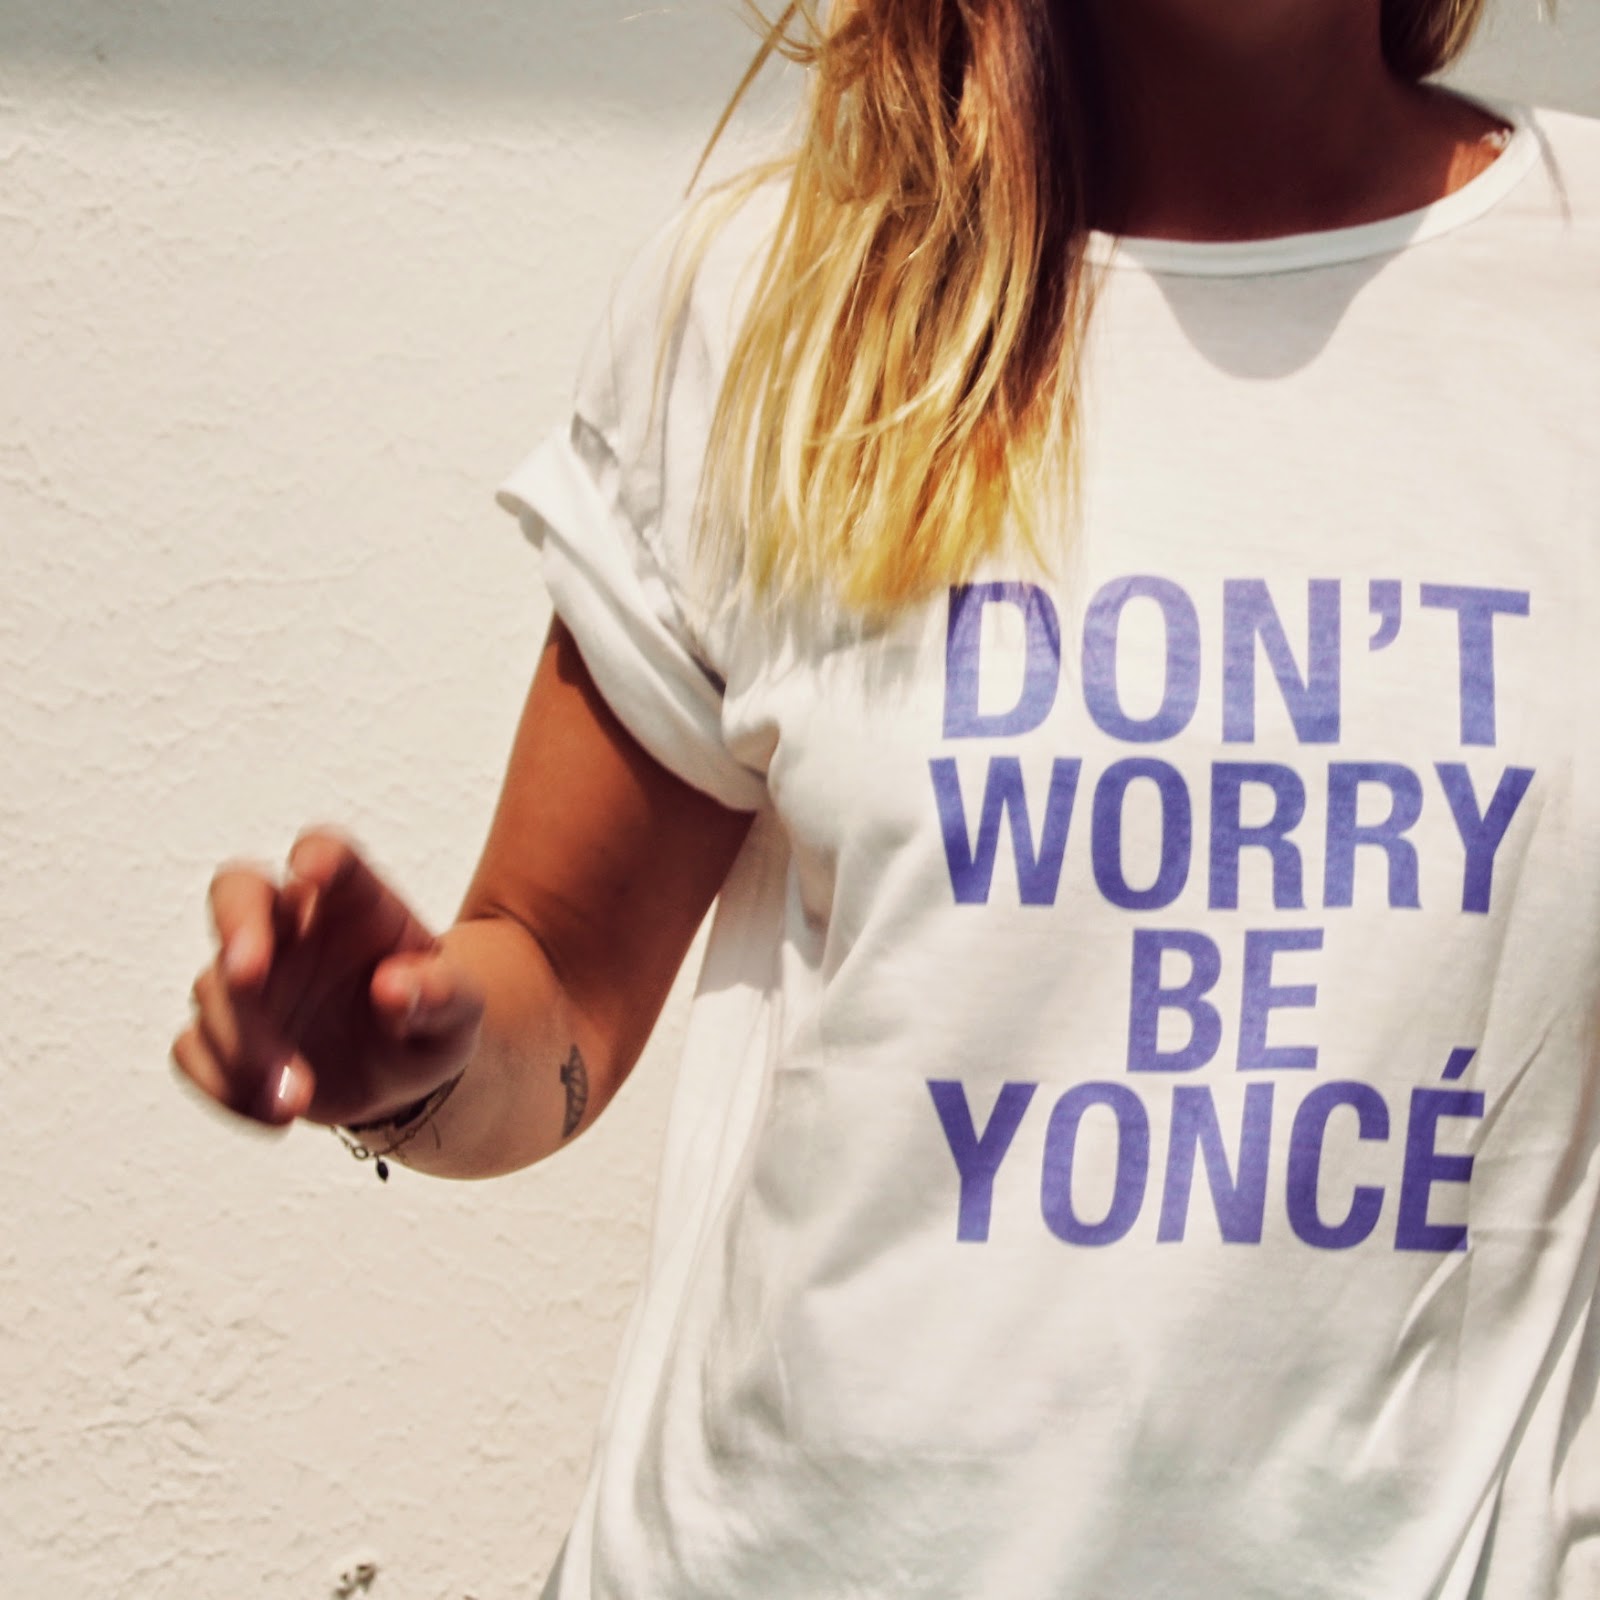 https://www.etsy.com/listing/199341448/dont-worry-be-yonce?ref=listing-shop-header-0